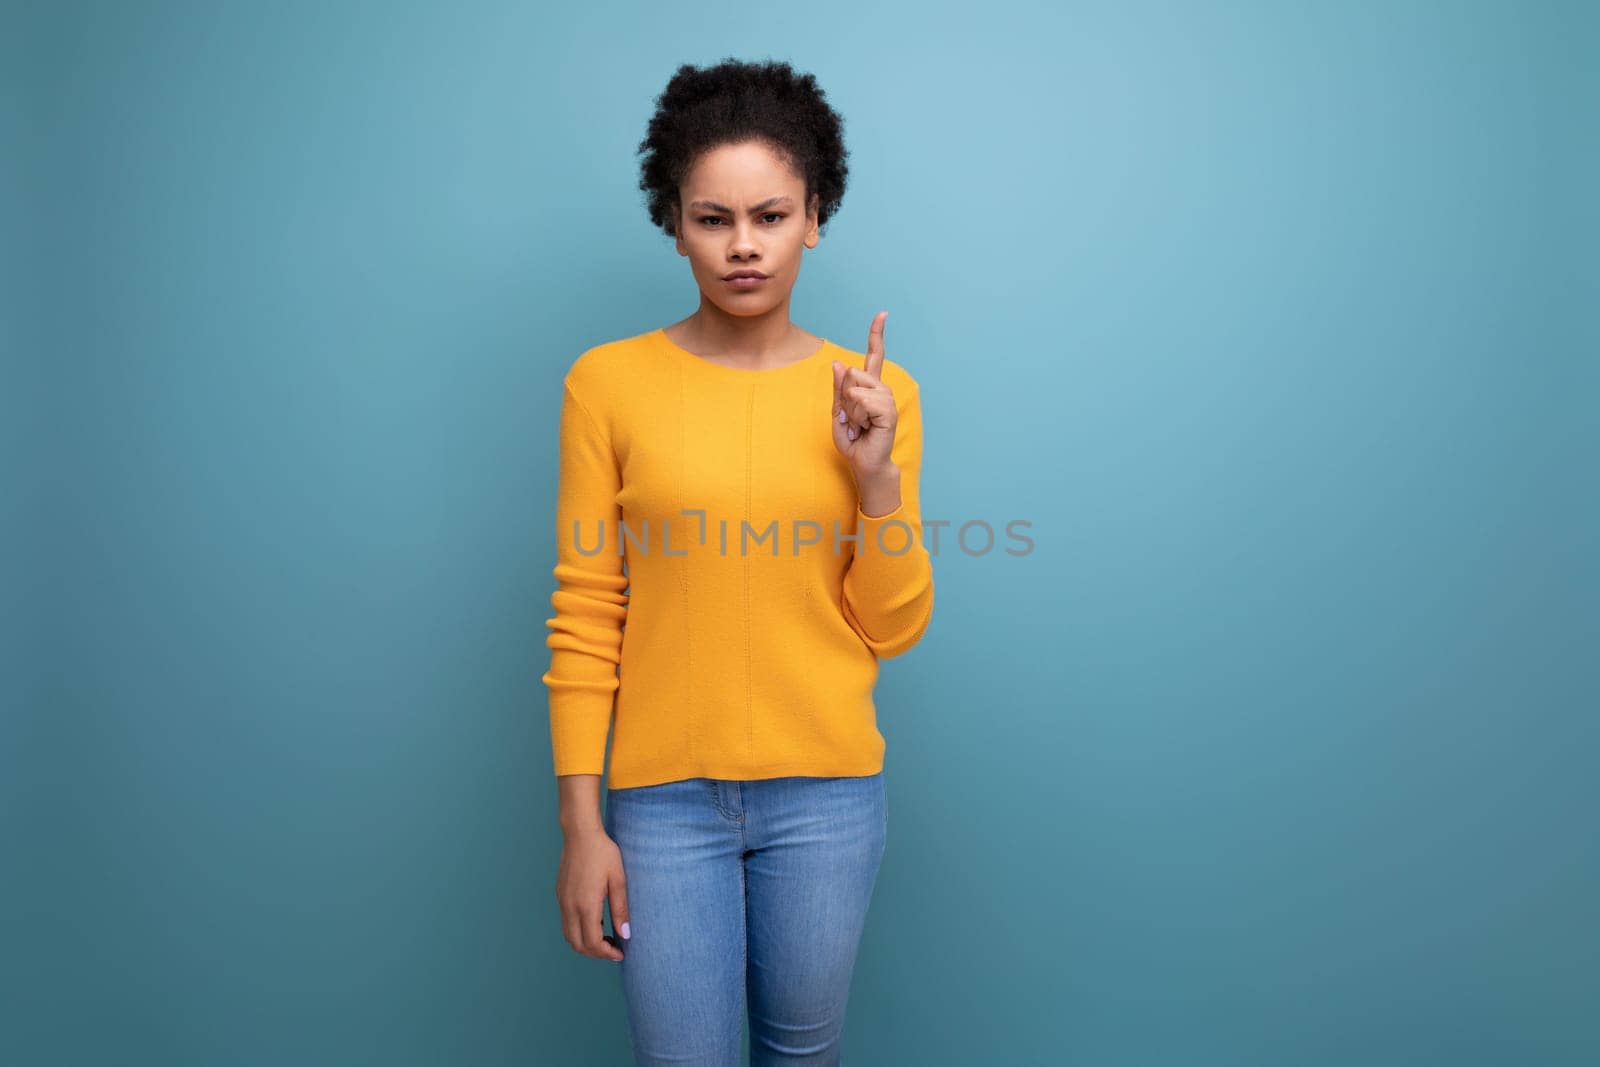 young Hispanic woman with black curly hair in a yellow sweater points her index finger up.